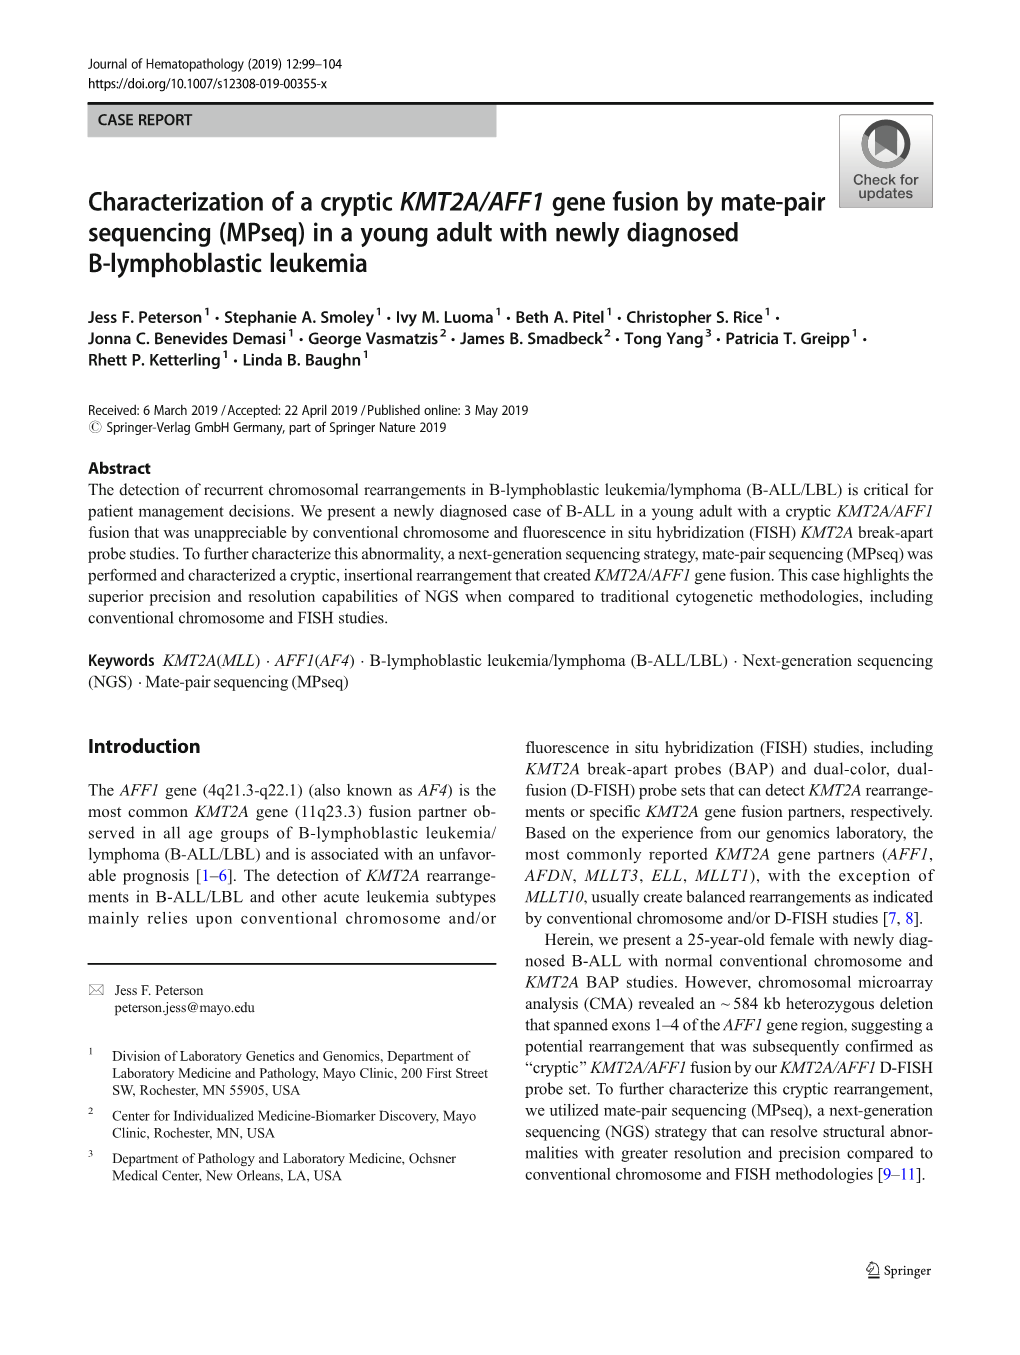 Characterization of a Cryptic KMT2A/AFF1 Gene Fusion by Mate-Pair Sequencing (Mpseq) in a Young Adult with Newly Diagnosed B-Lymphoblastic Leukemia